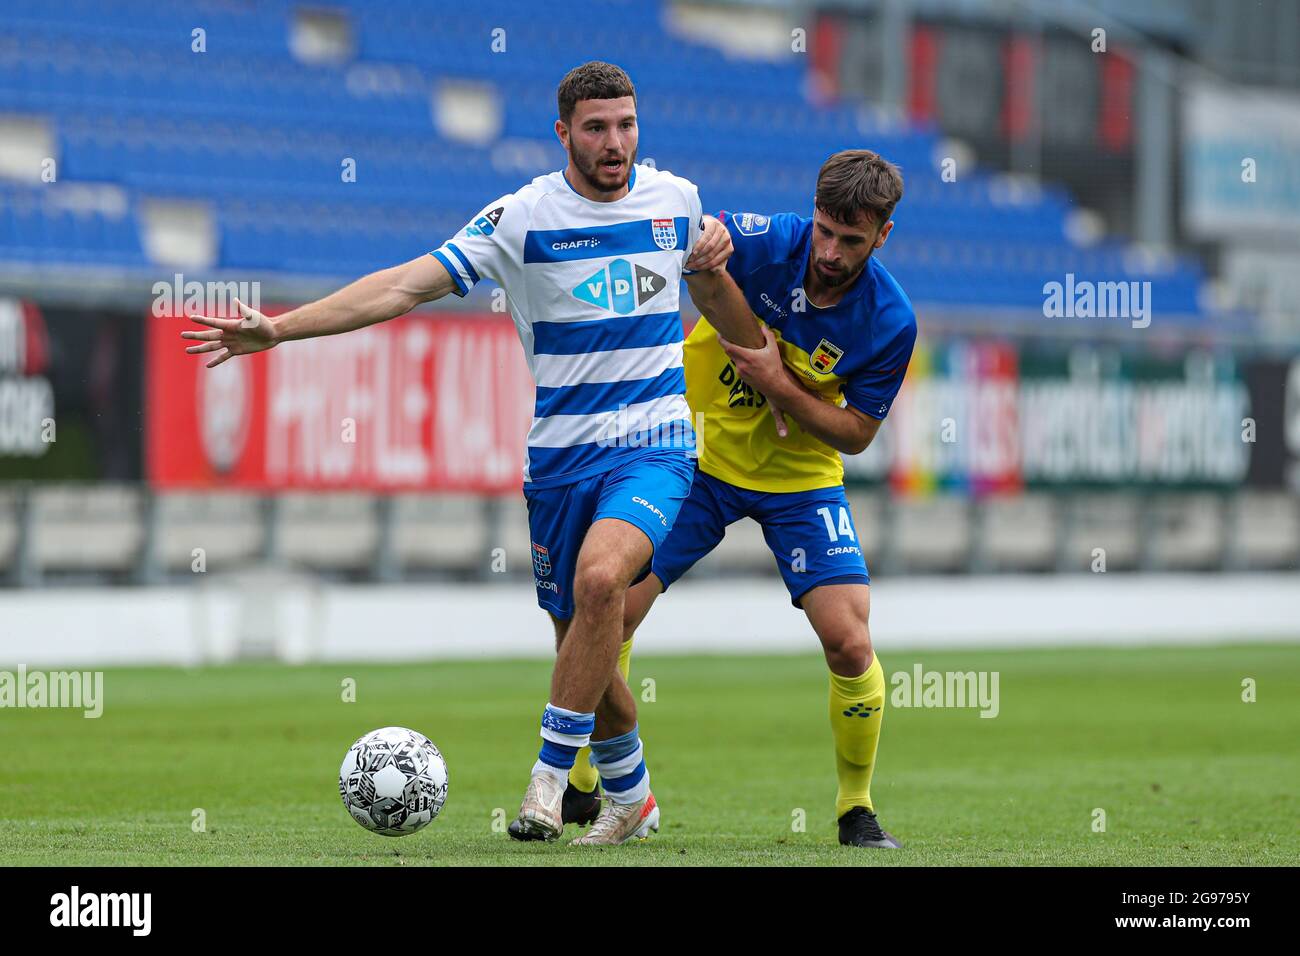 ZWOLLE, NETHERLANDS - JULY 24: Chardi Landu of PEC Zwolle during the  Pre-season Friendly match between PEC Zwolle and SC Cambuur at Mac park  stadion on July 24, 2021 in Zwolle, Netherlands (